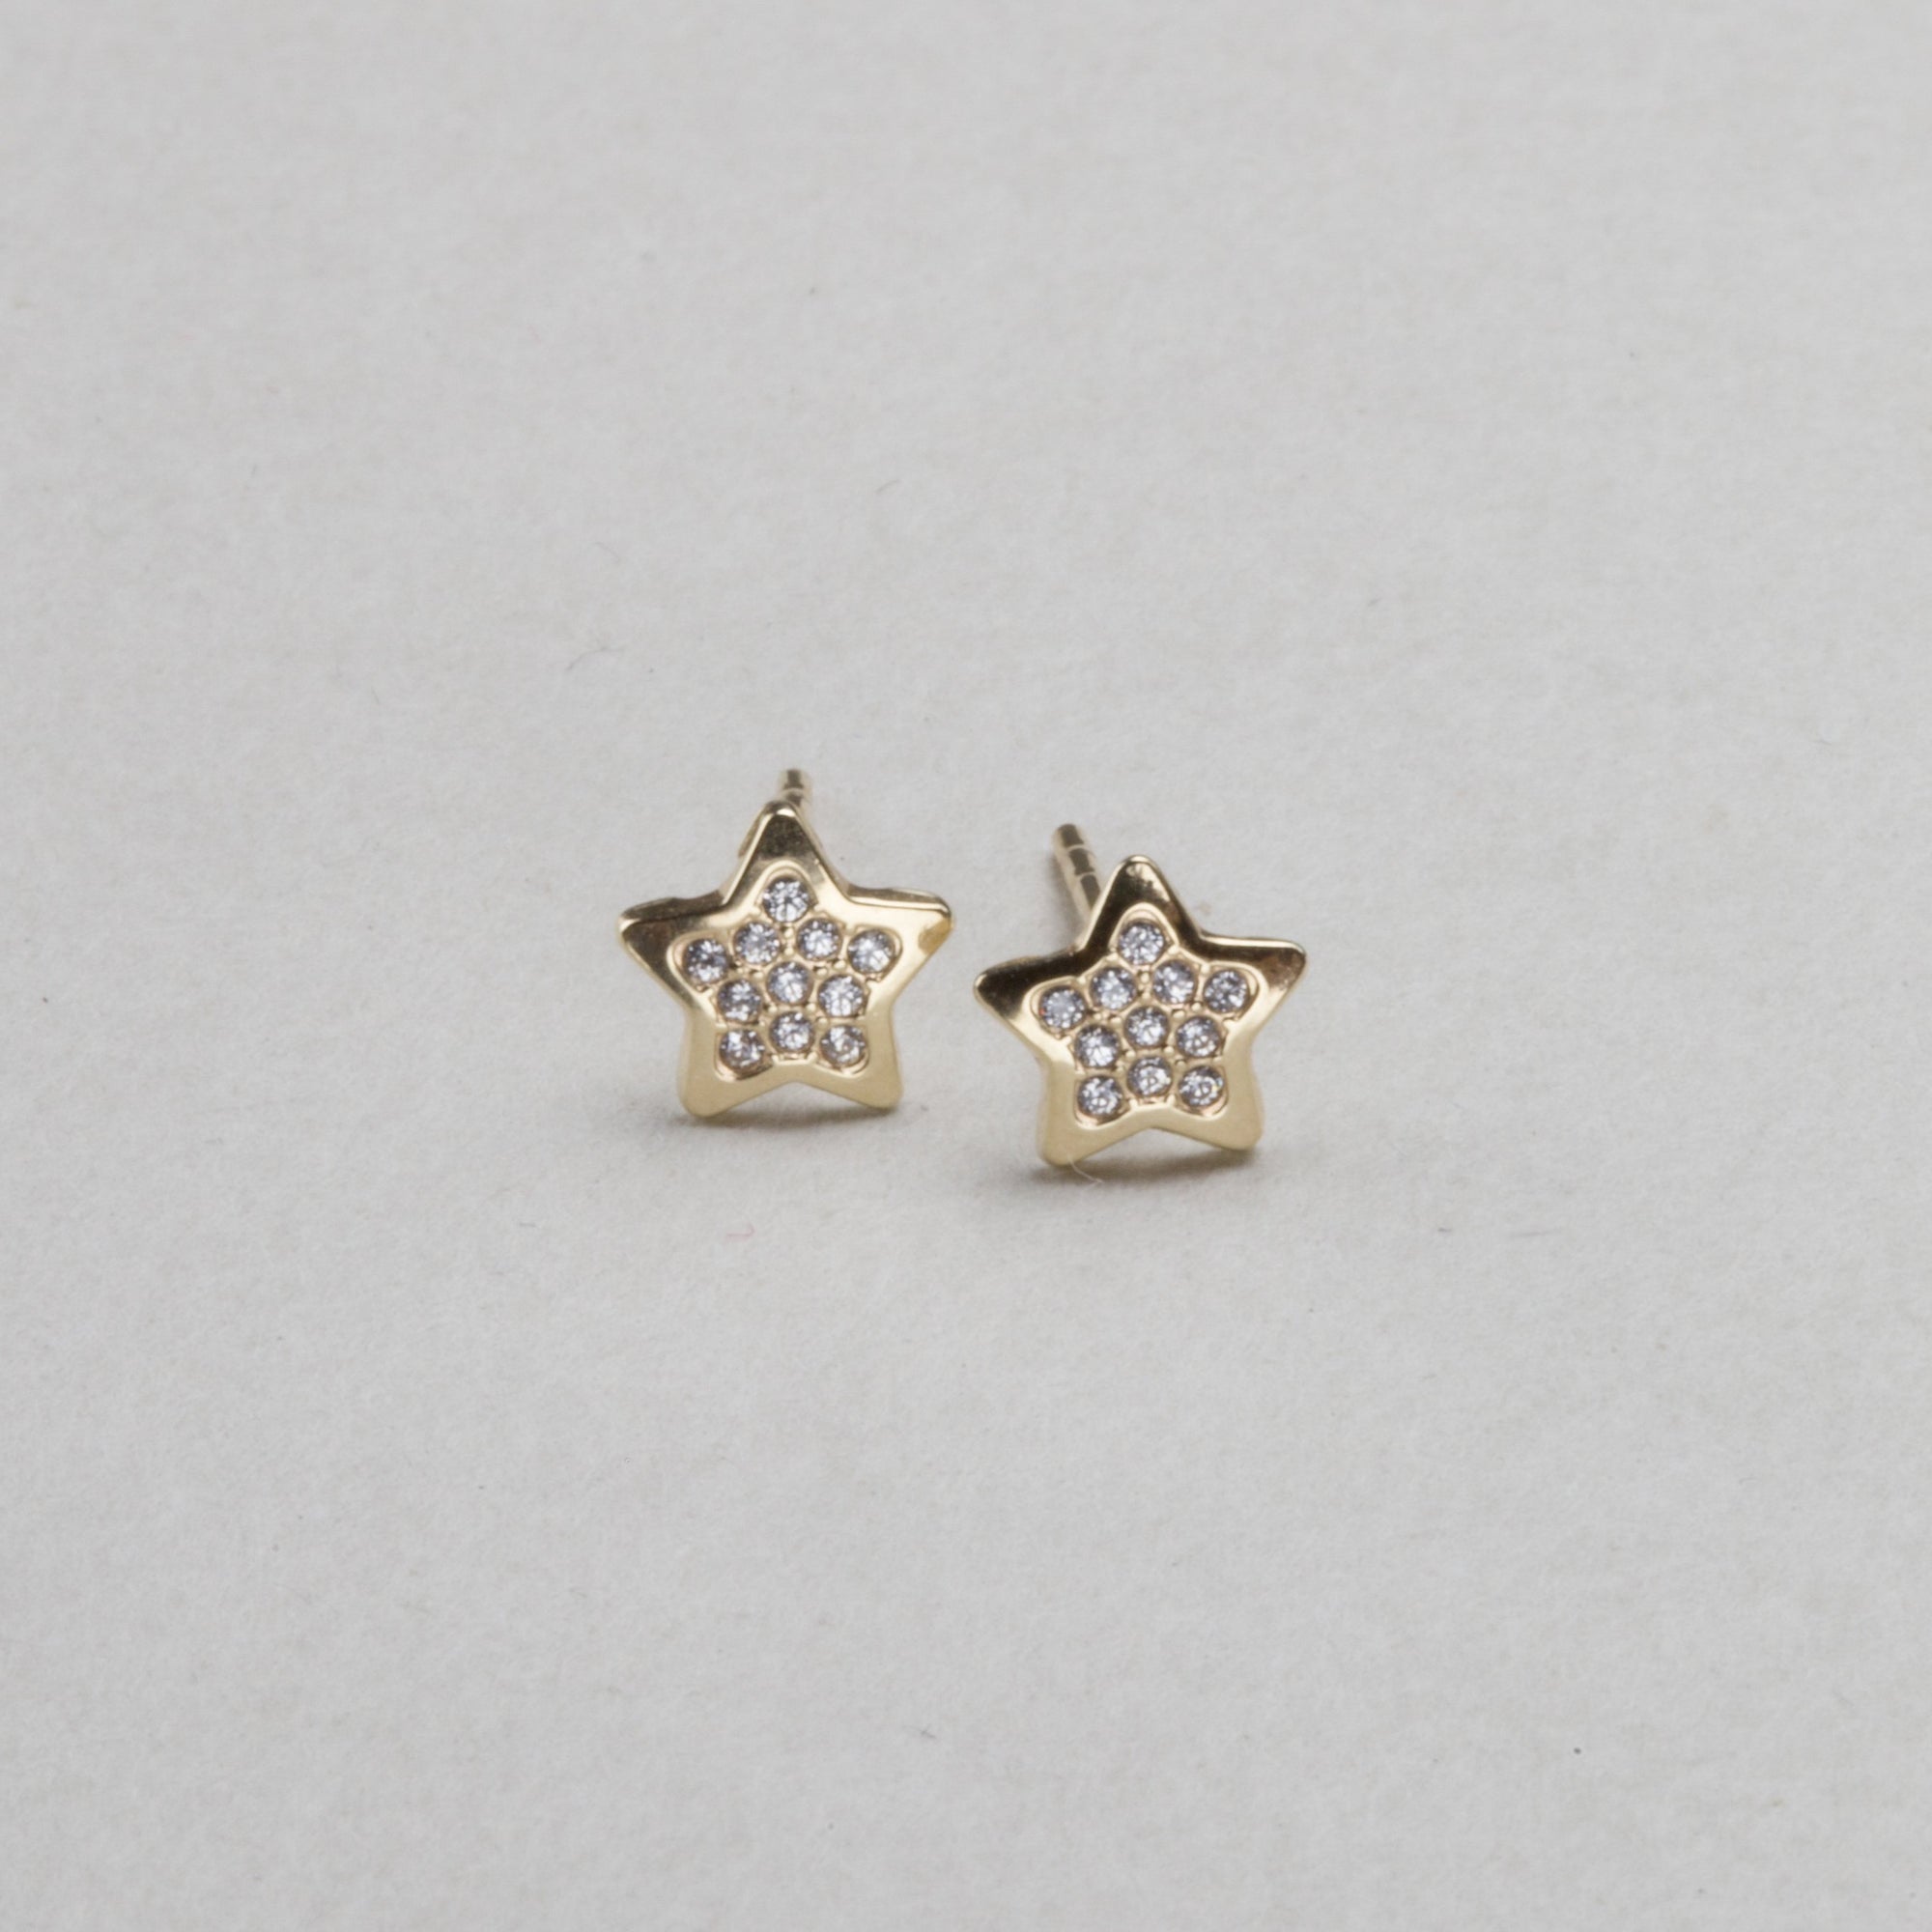 Gold Star Stud Earrings with Cubic Zirconia